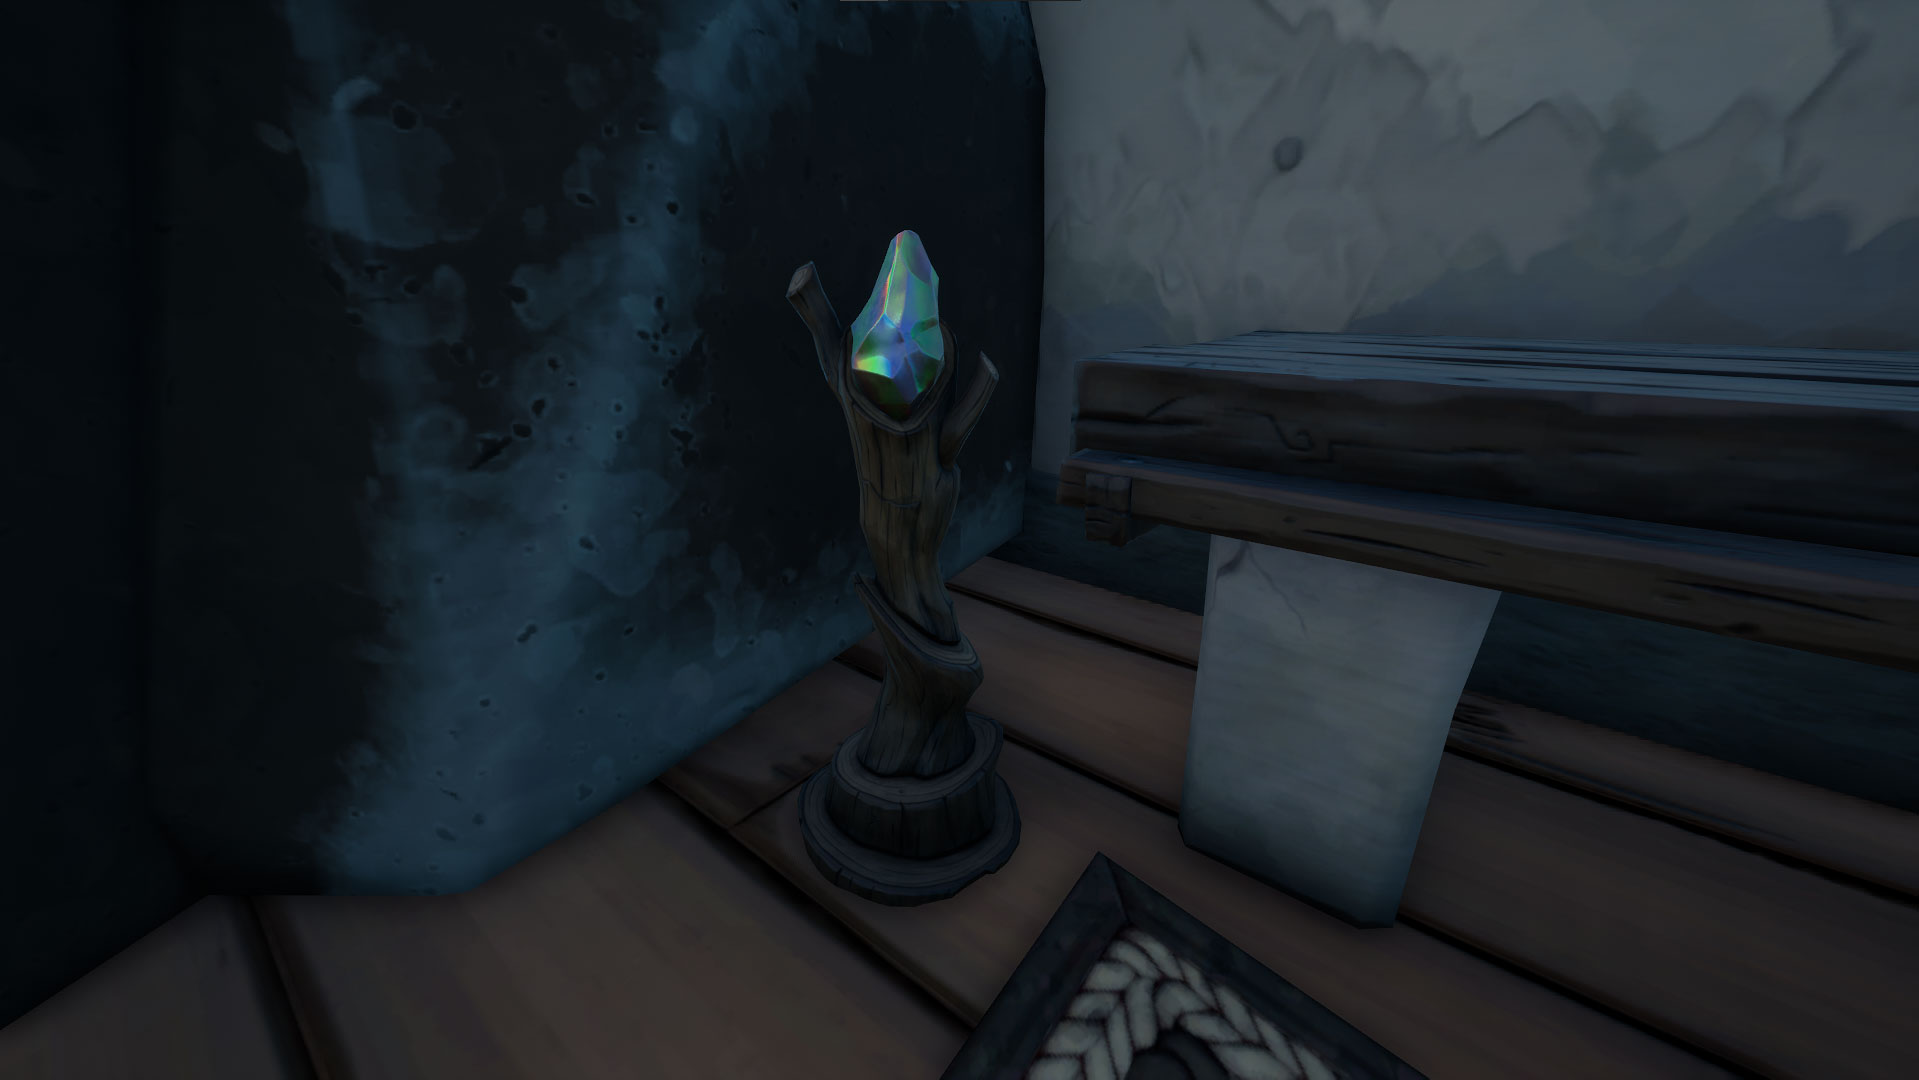 retrieve the cult artifact from the spire for raz